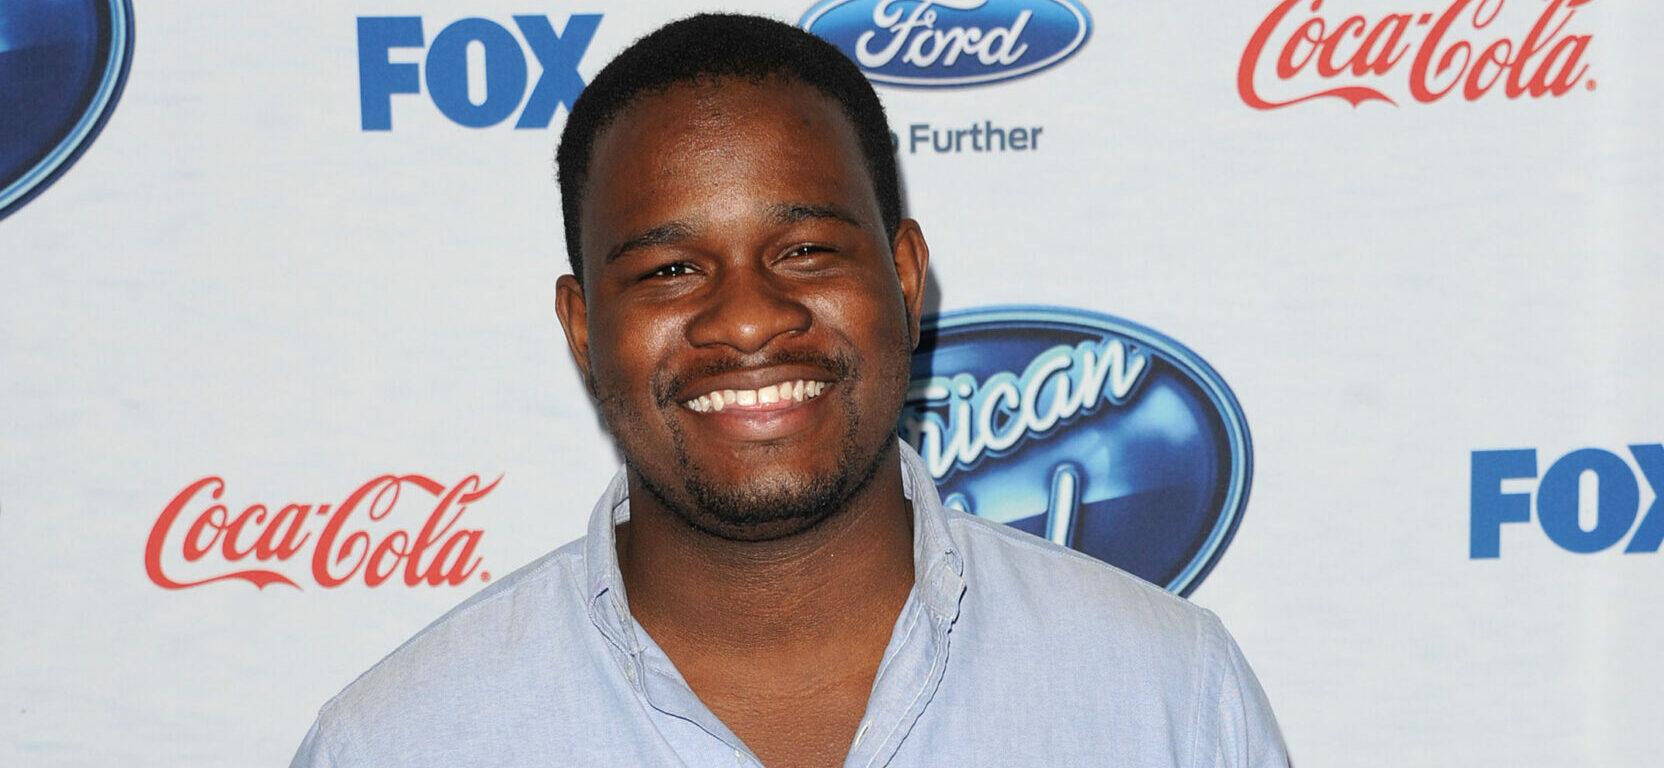 Fans ‘In SHOCK’ At Sudden Passing Of 31-Year-Old ‘American Idol’ Alum C.J. Harris